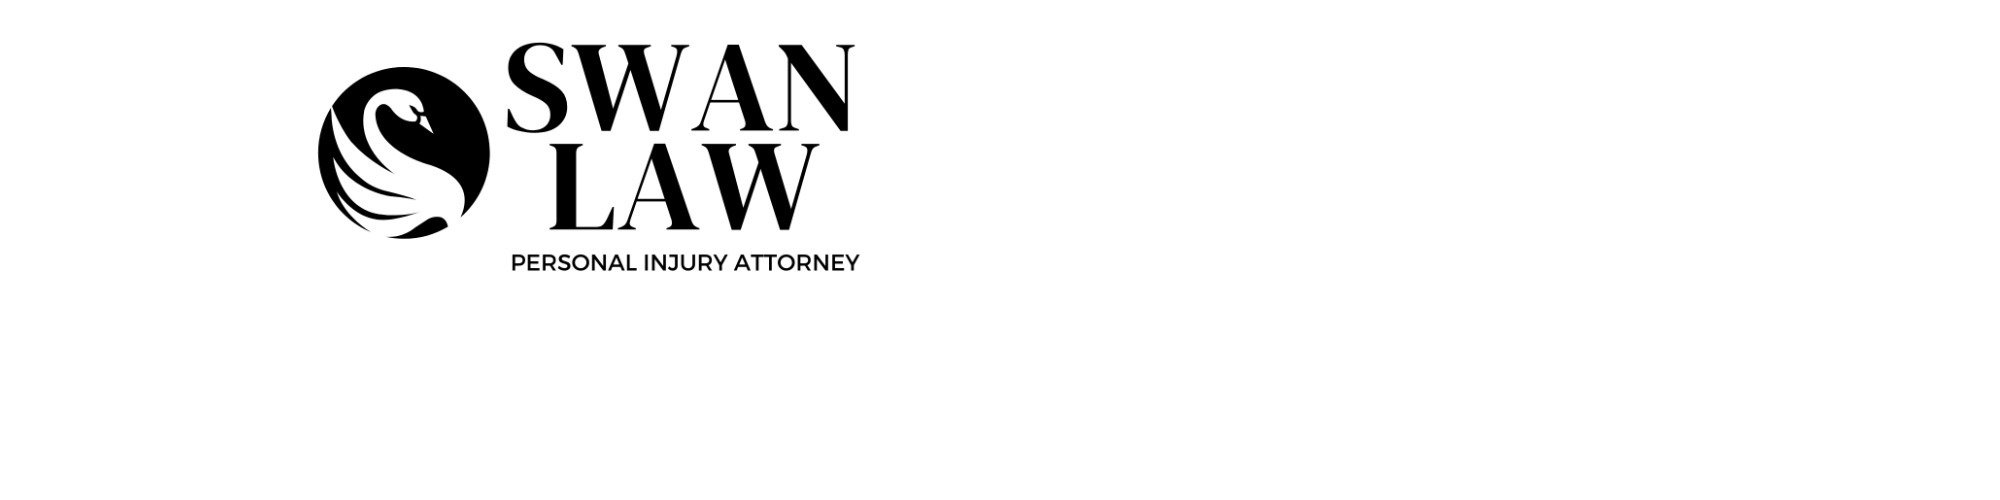 Swan Law, P.A. Savannah Personal Injury Firm cover